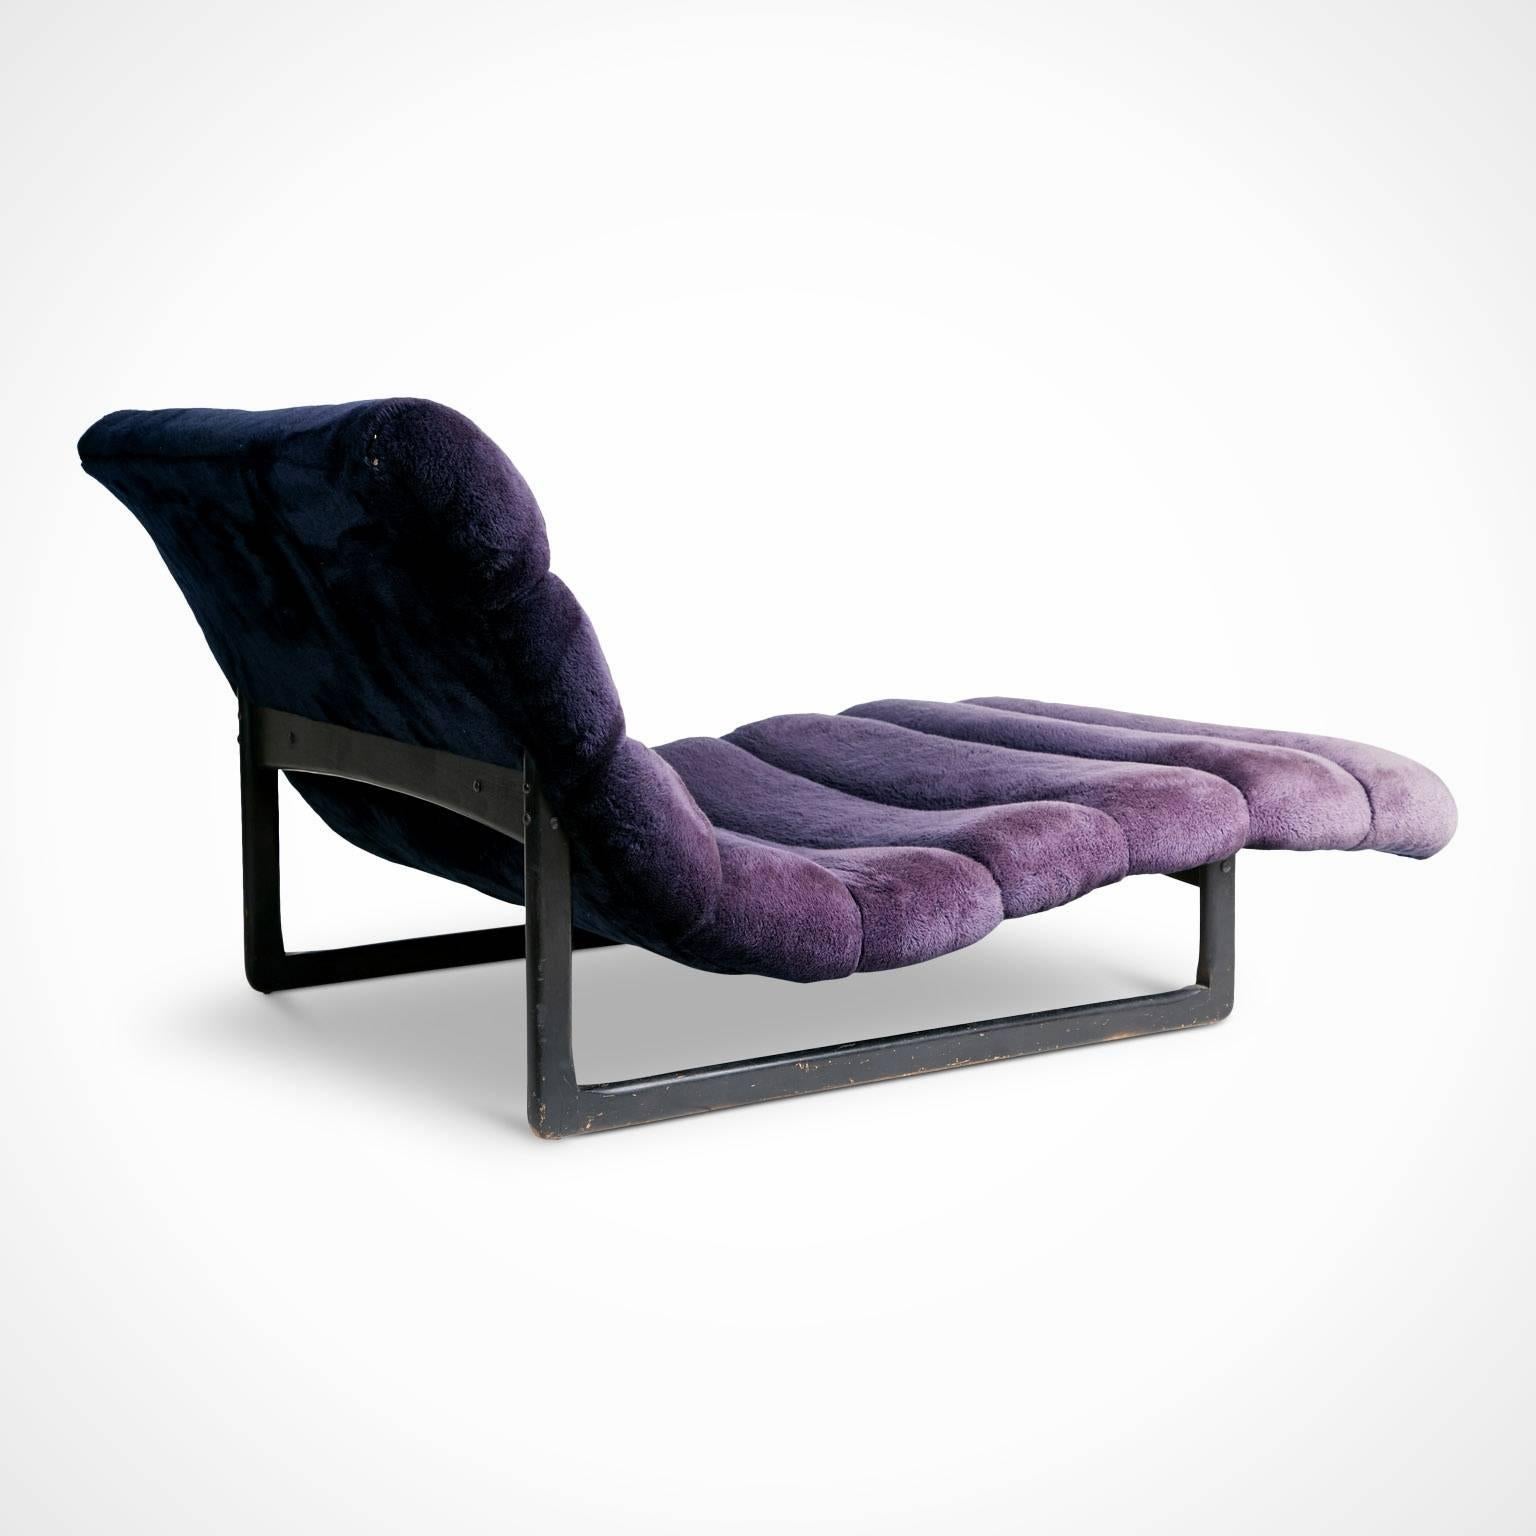 American Adrian Pearsall Chaise Lounge for Craft Associates, circa 1960